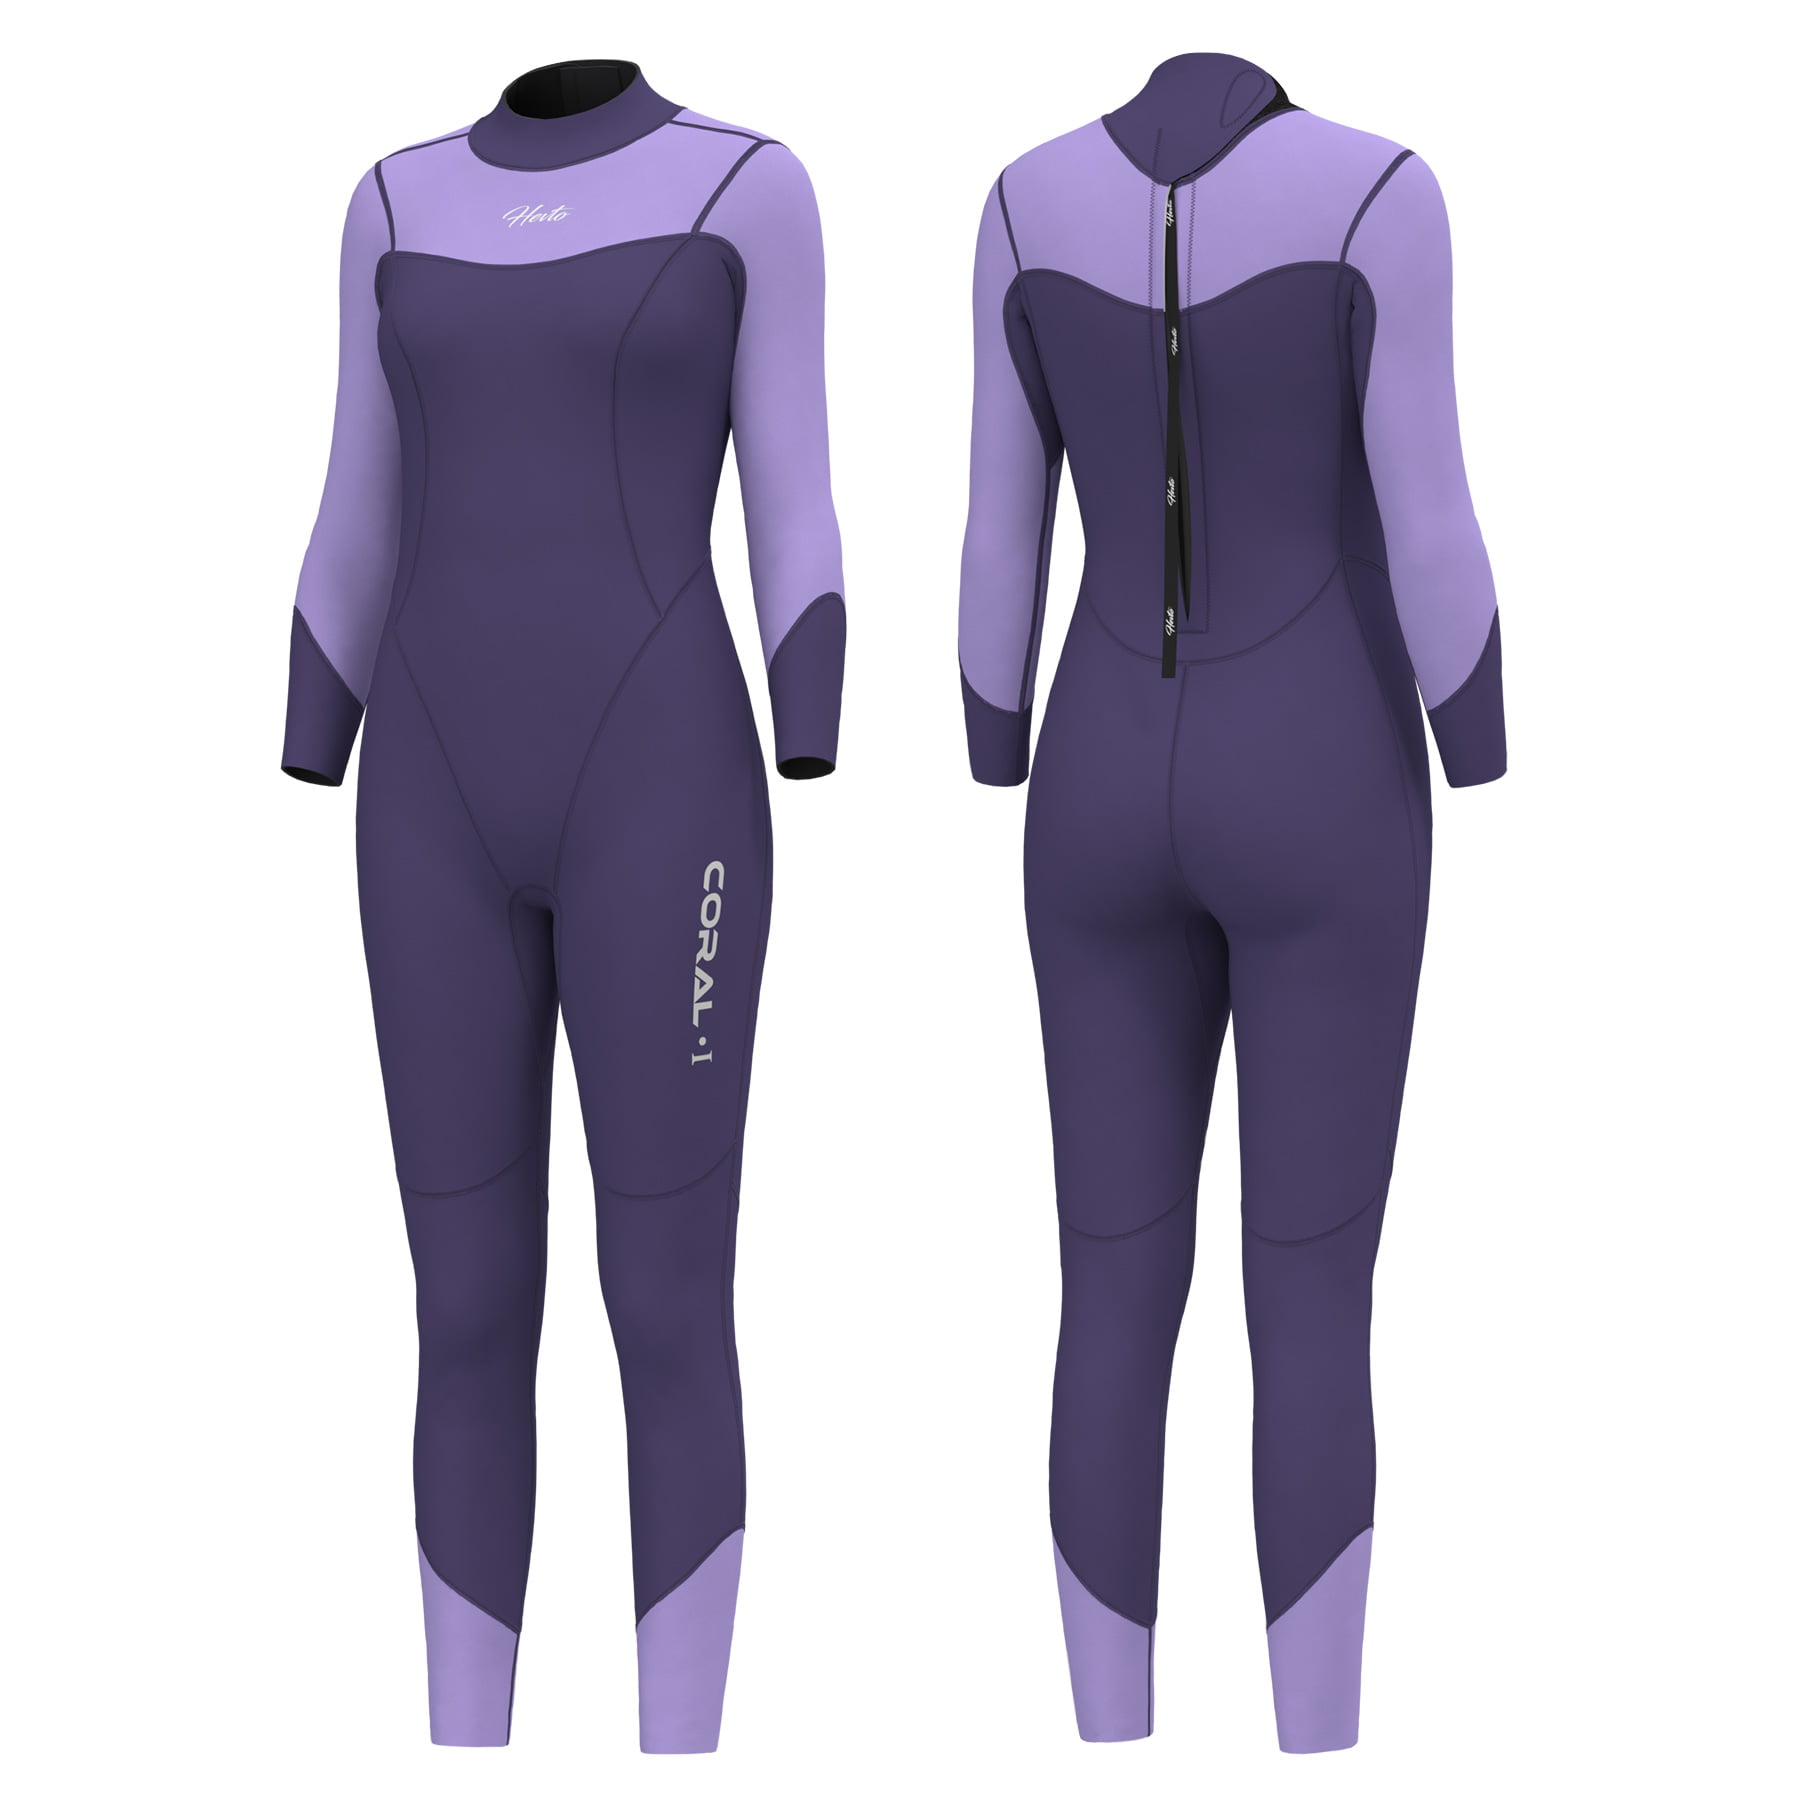 Hevto Wetsuits Coral Old Men and Women 3mm Neoprene Full Scuba Diving Suits Surfing Swimming for Water Sports